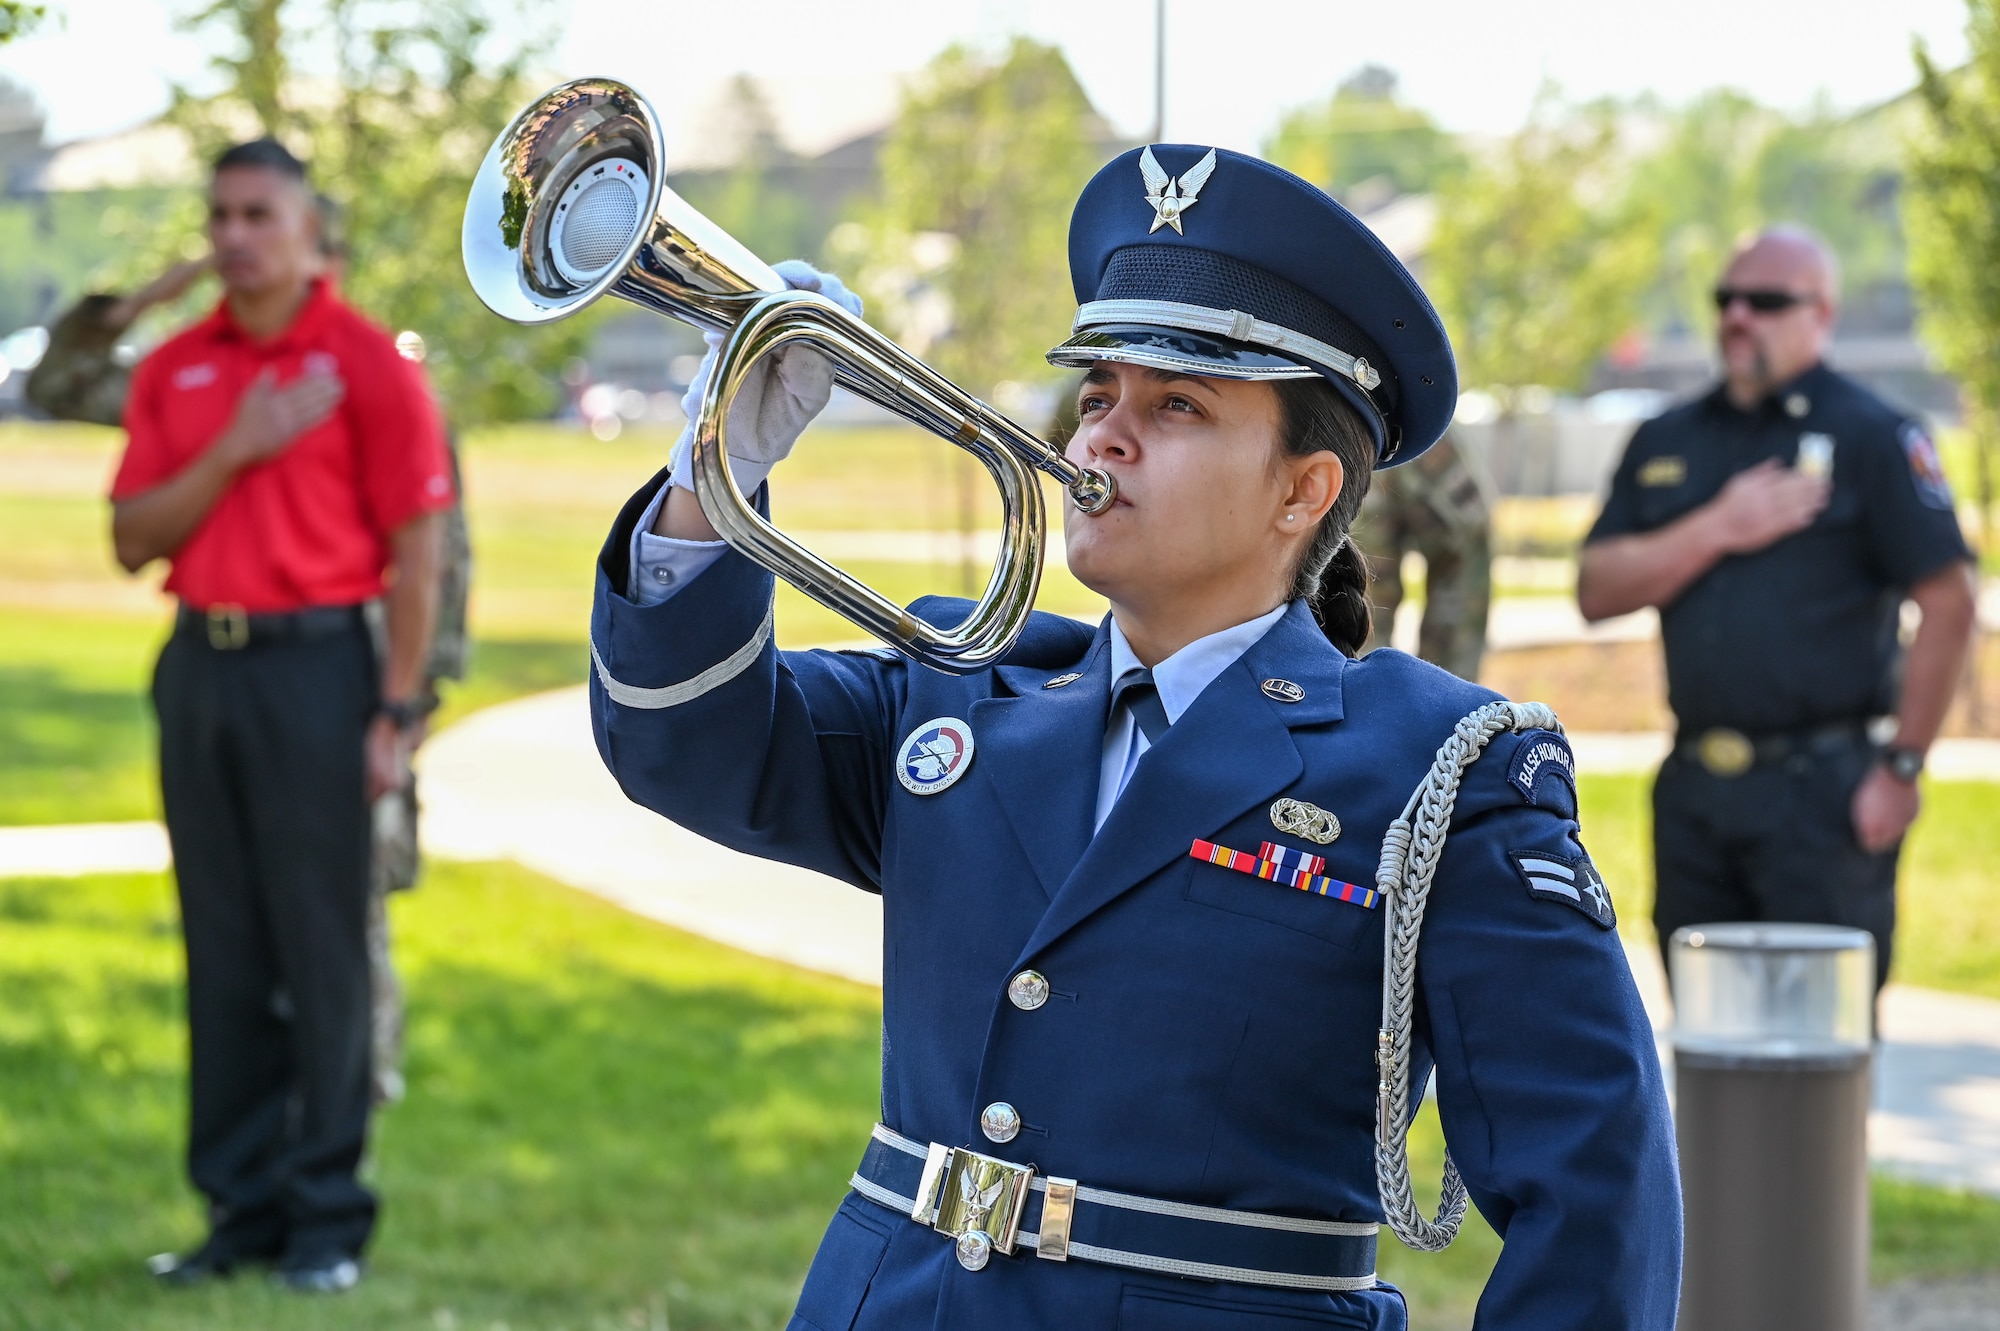 An Airman blows a bugle while others place their hand over the heart